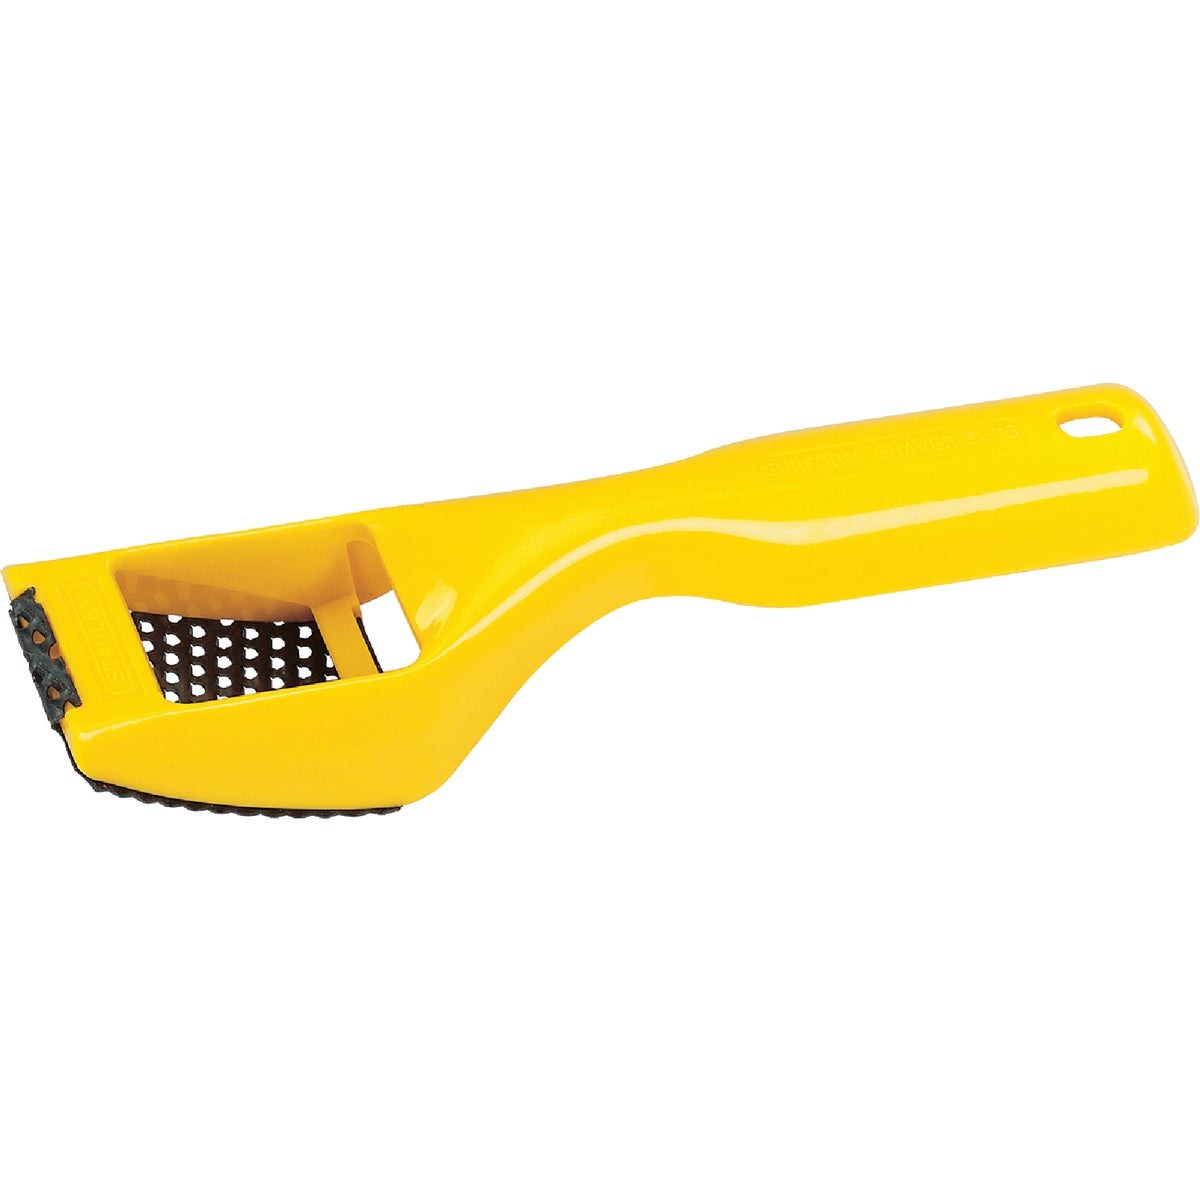 Stanley Surform Shaver Plane with 2-1/2 In. Blade